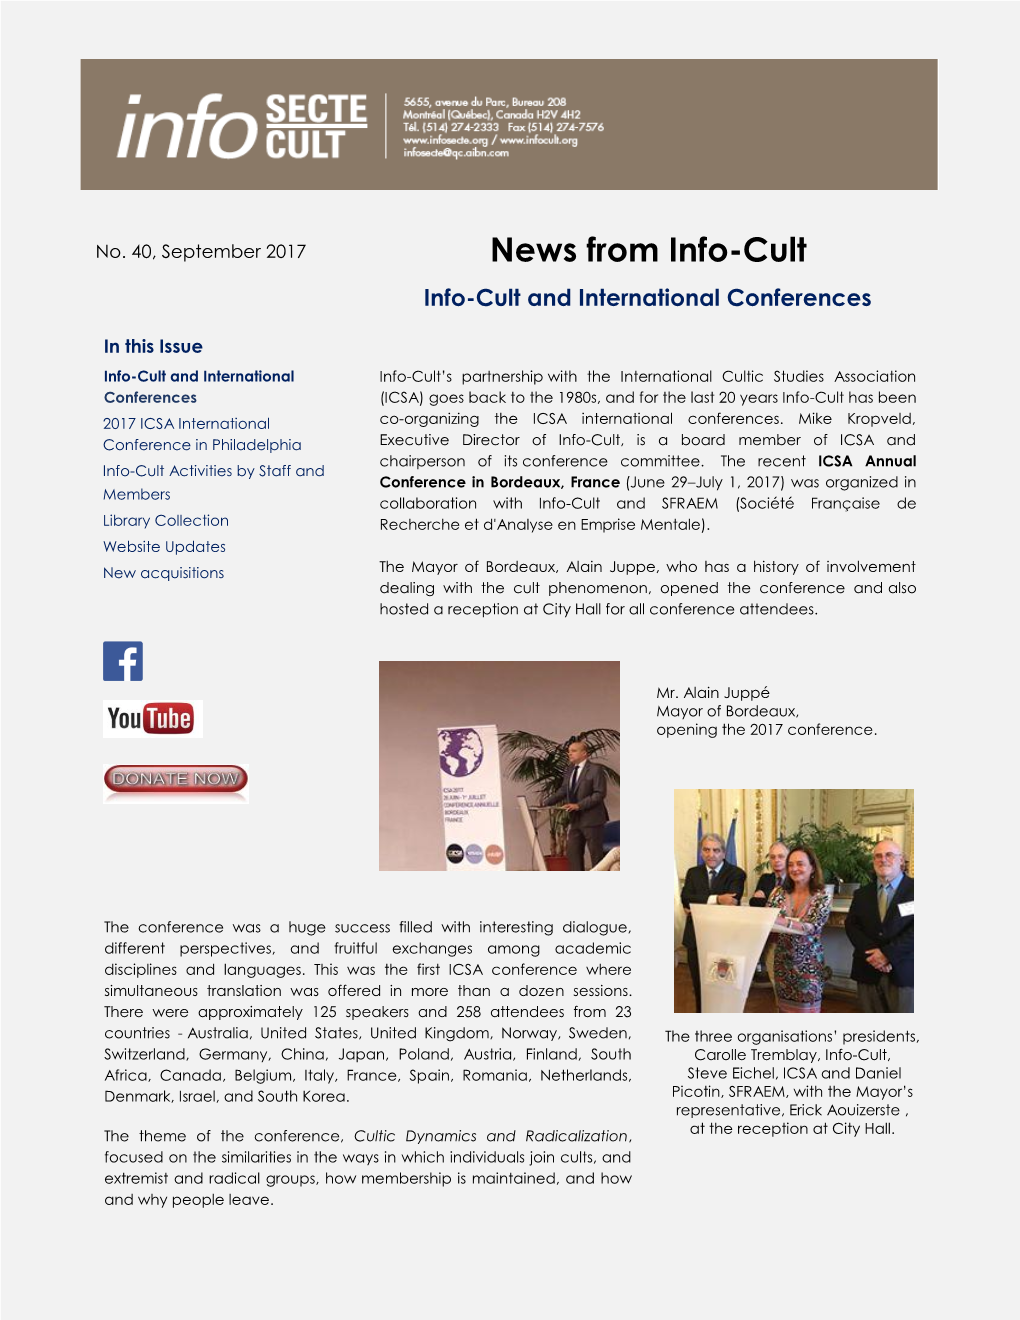 News from Info-Cult 12